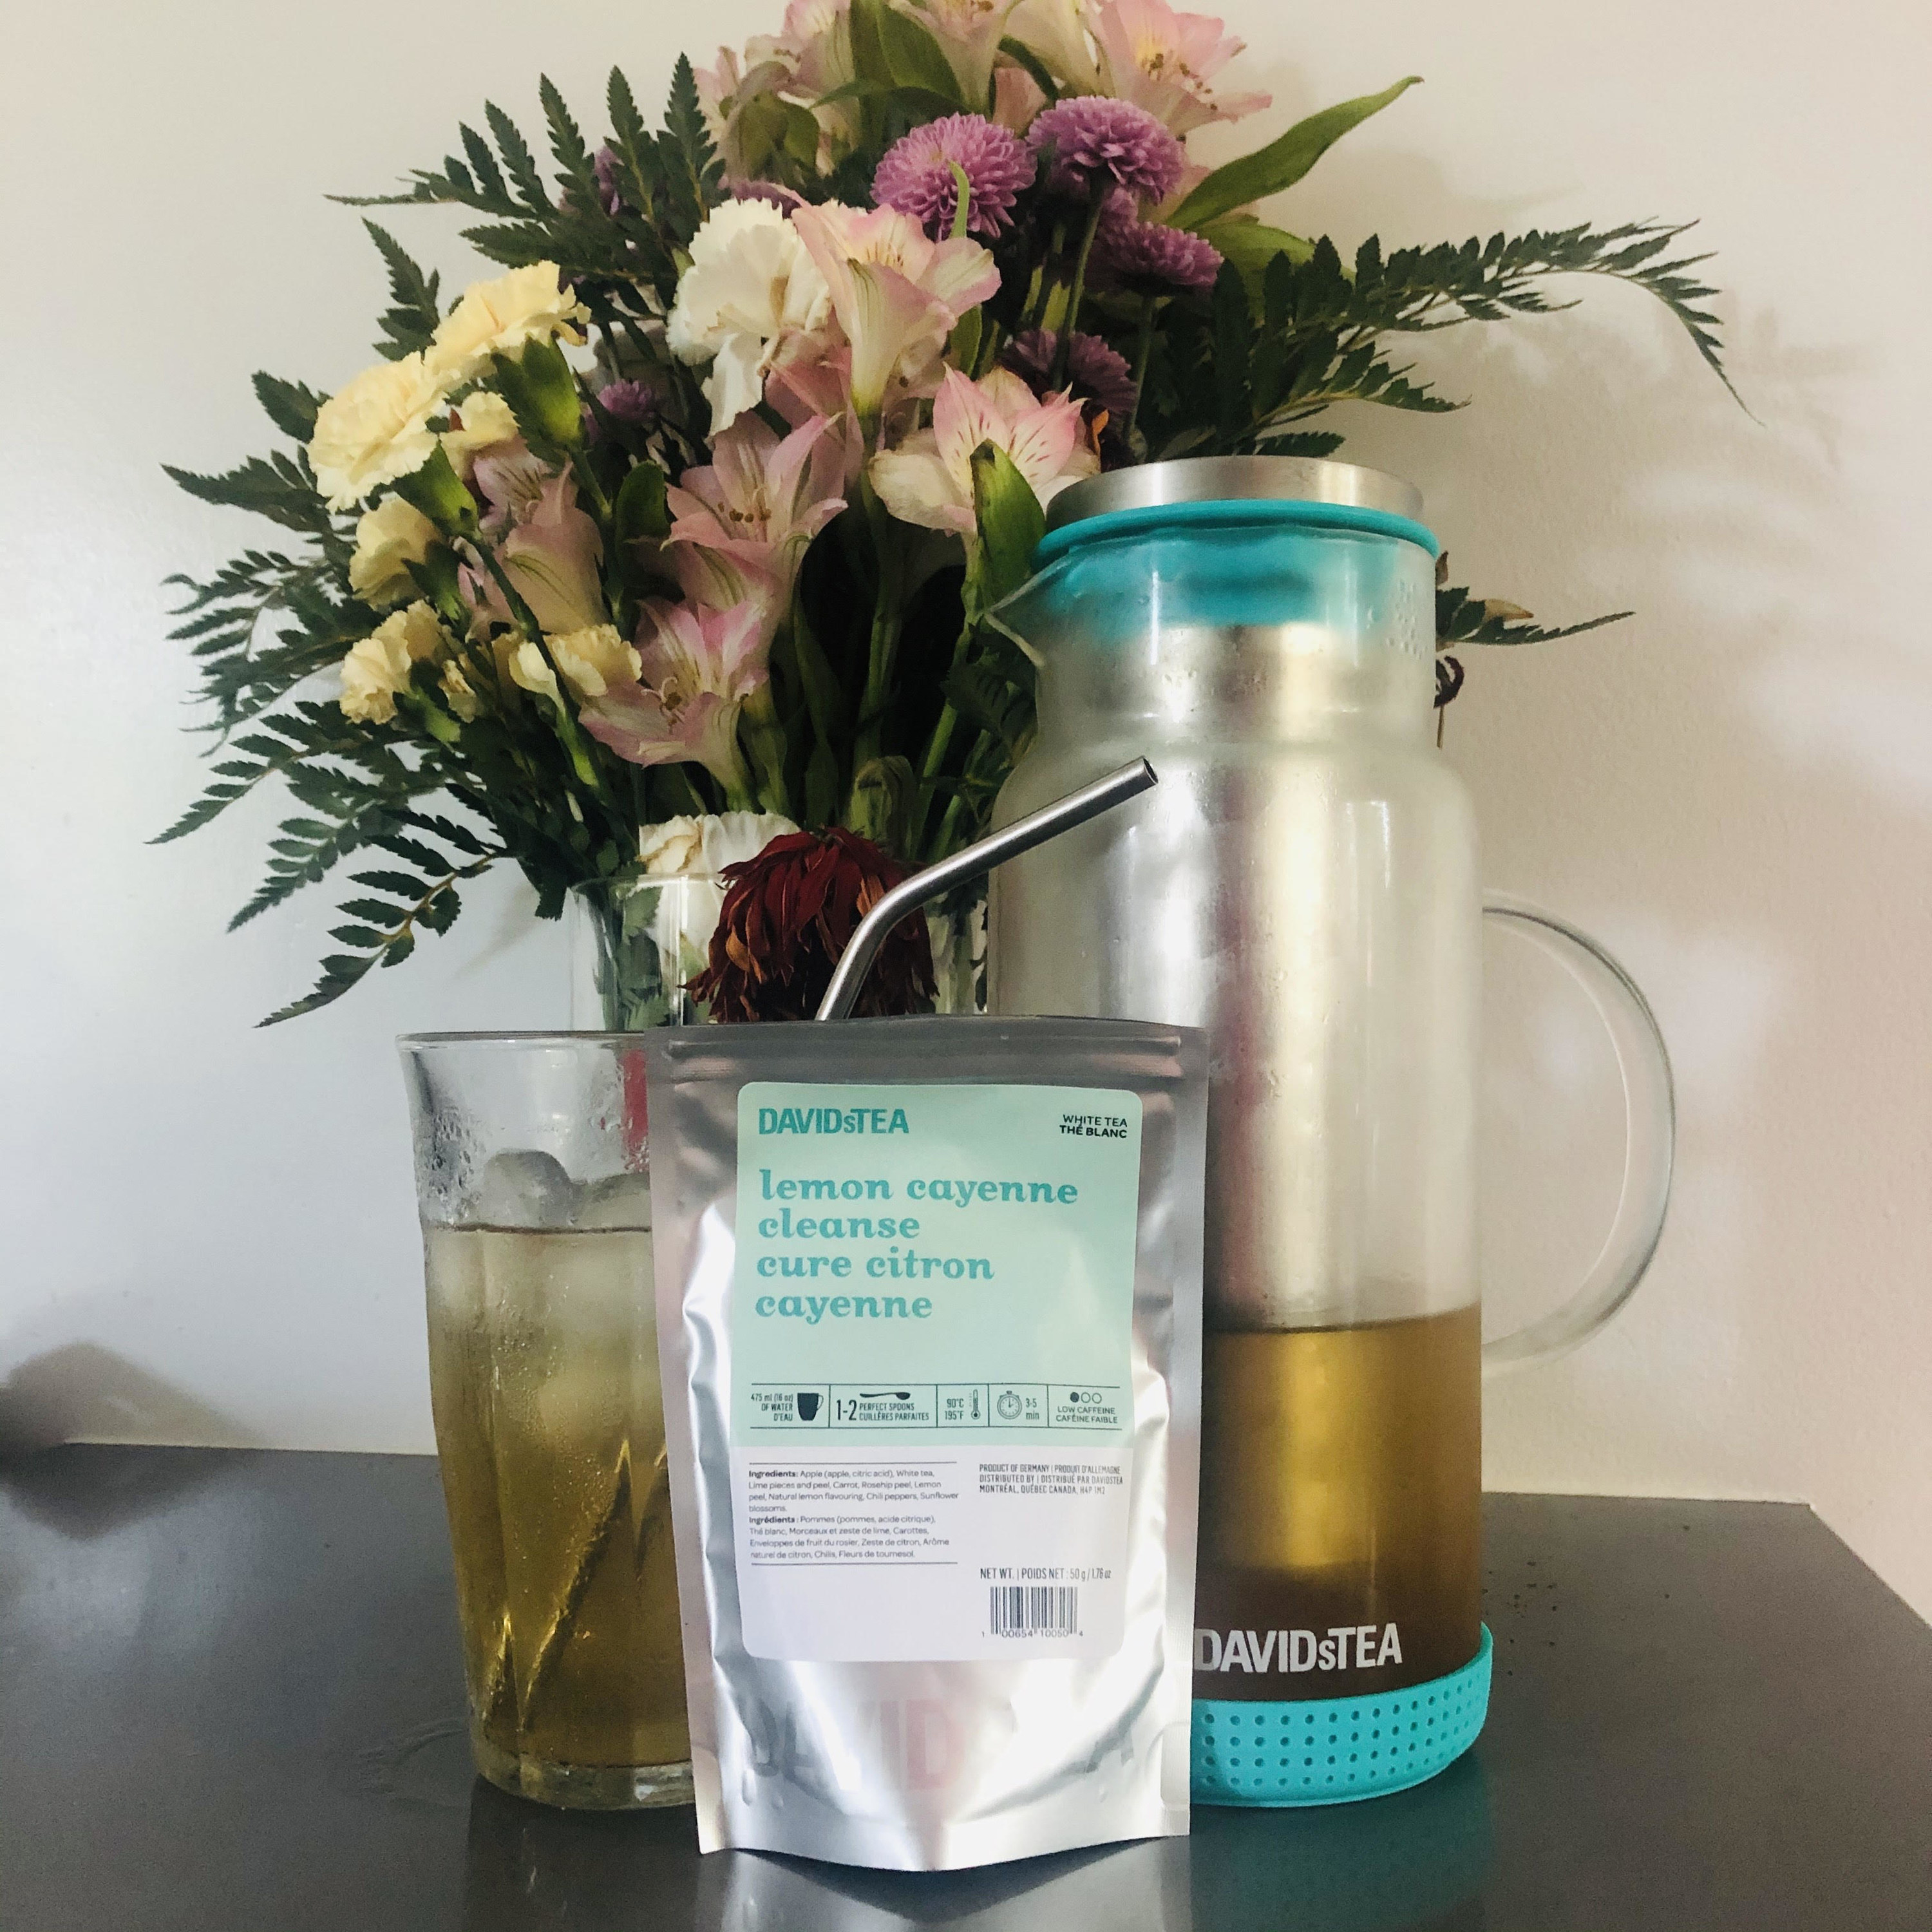 A bag of tea in front of a pitcher and glass of iced tea and a bouquet of flowers